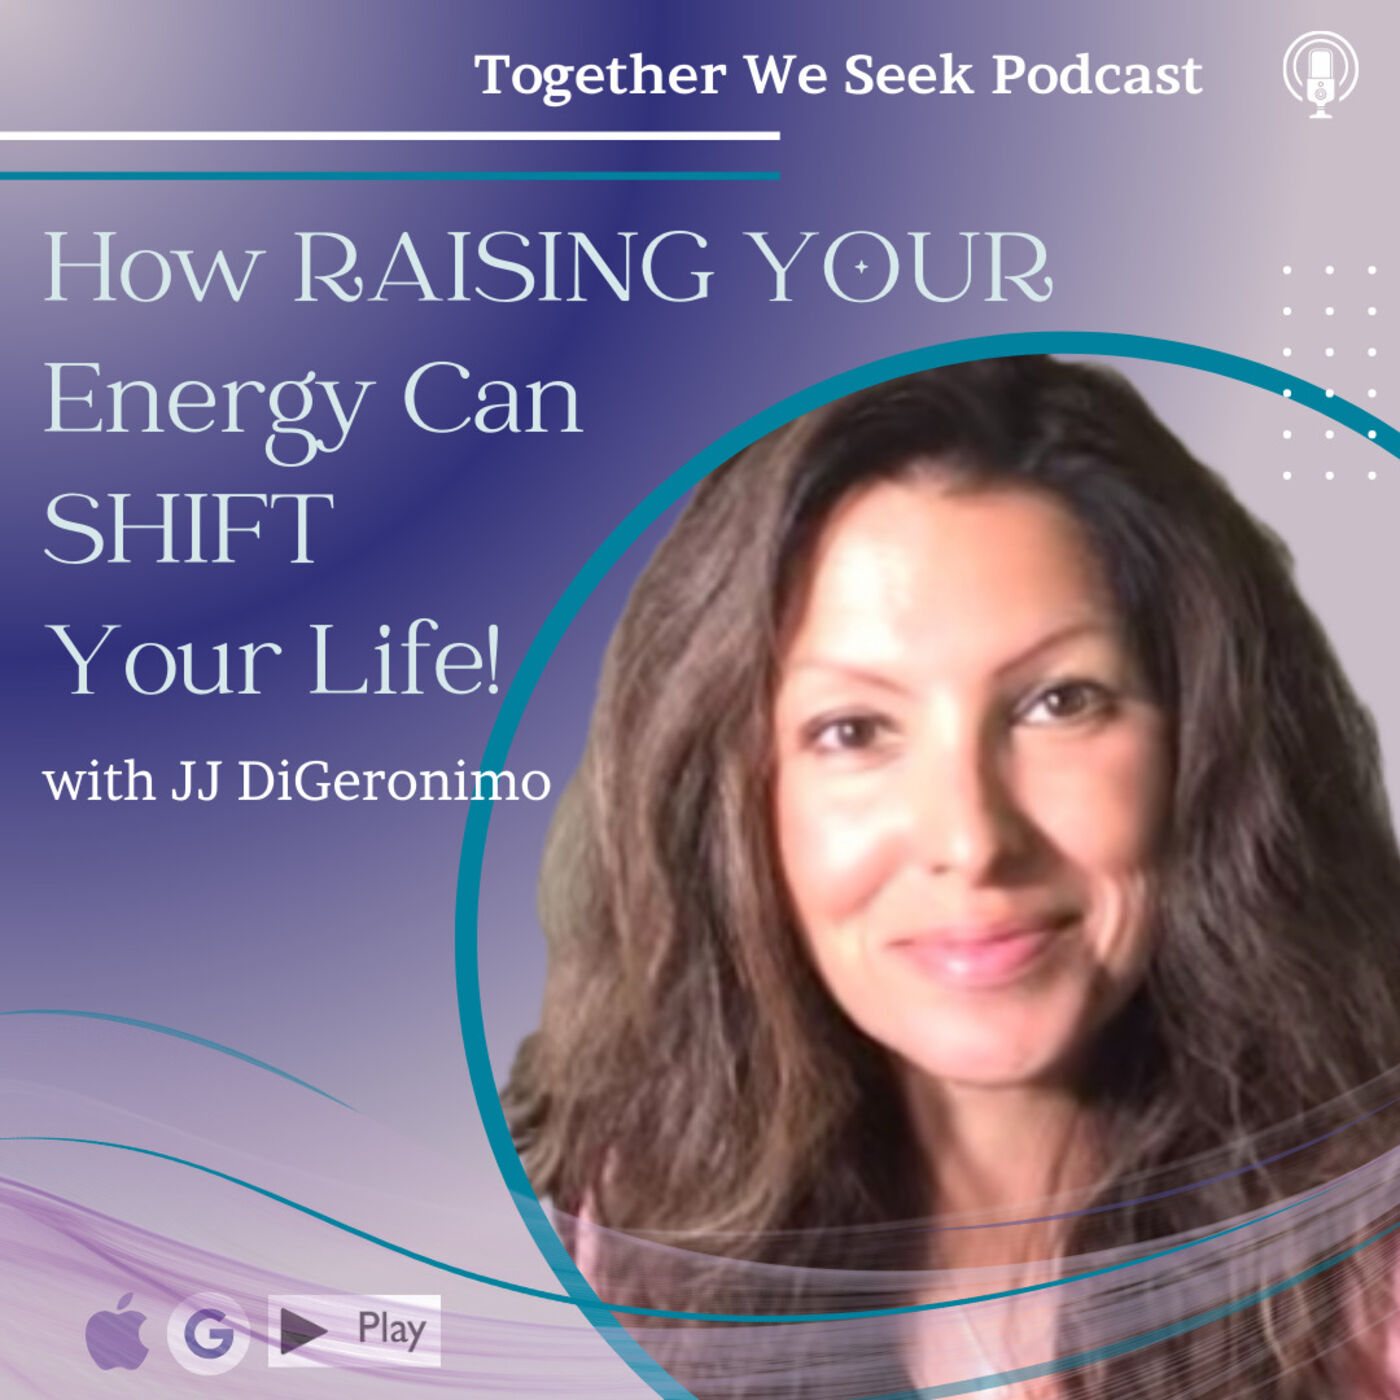 How RAISING YOUR Energy Can SHIFT Your Life!